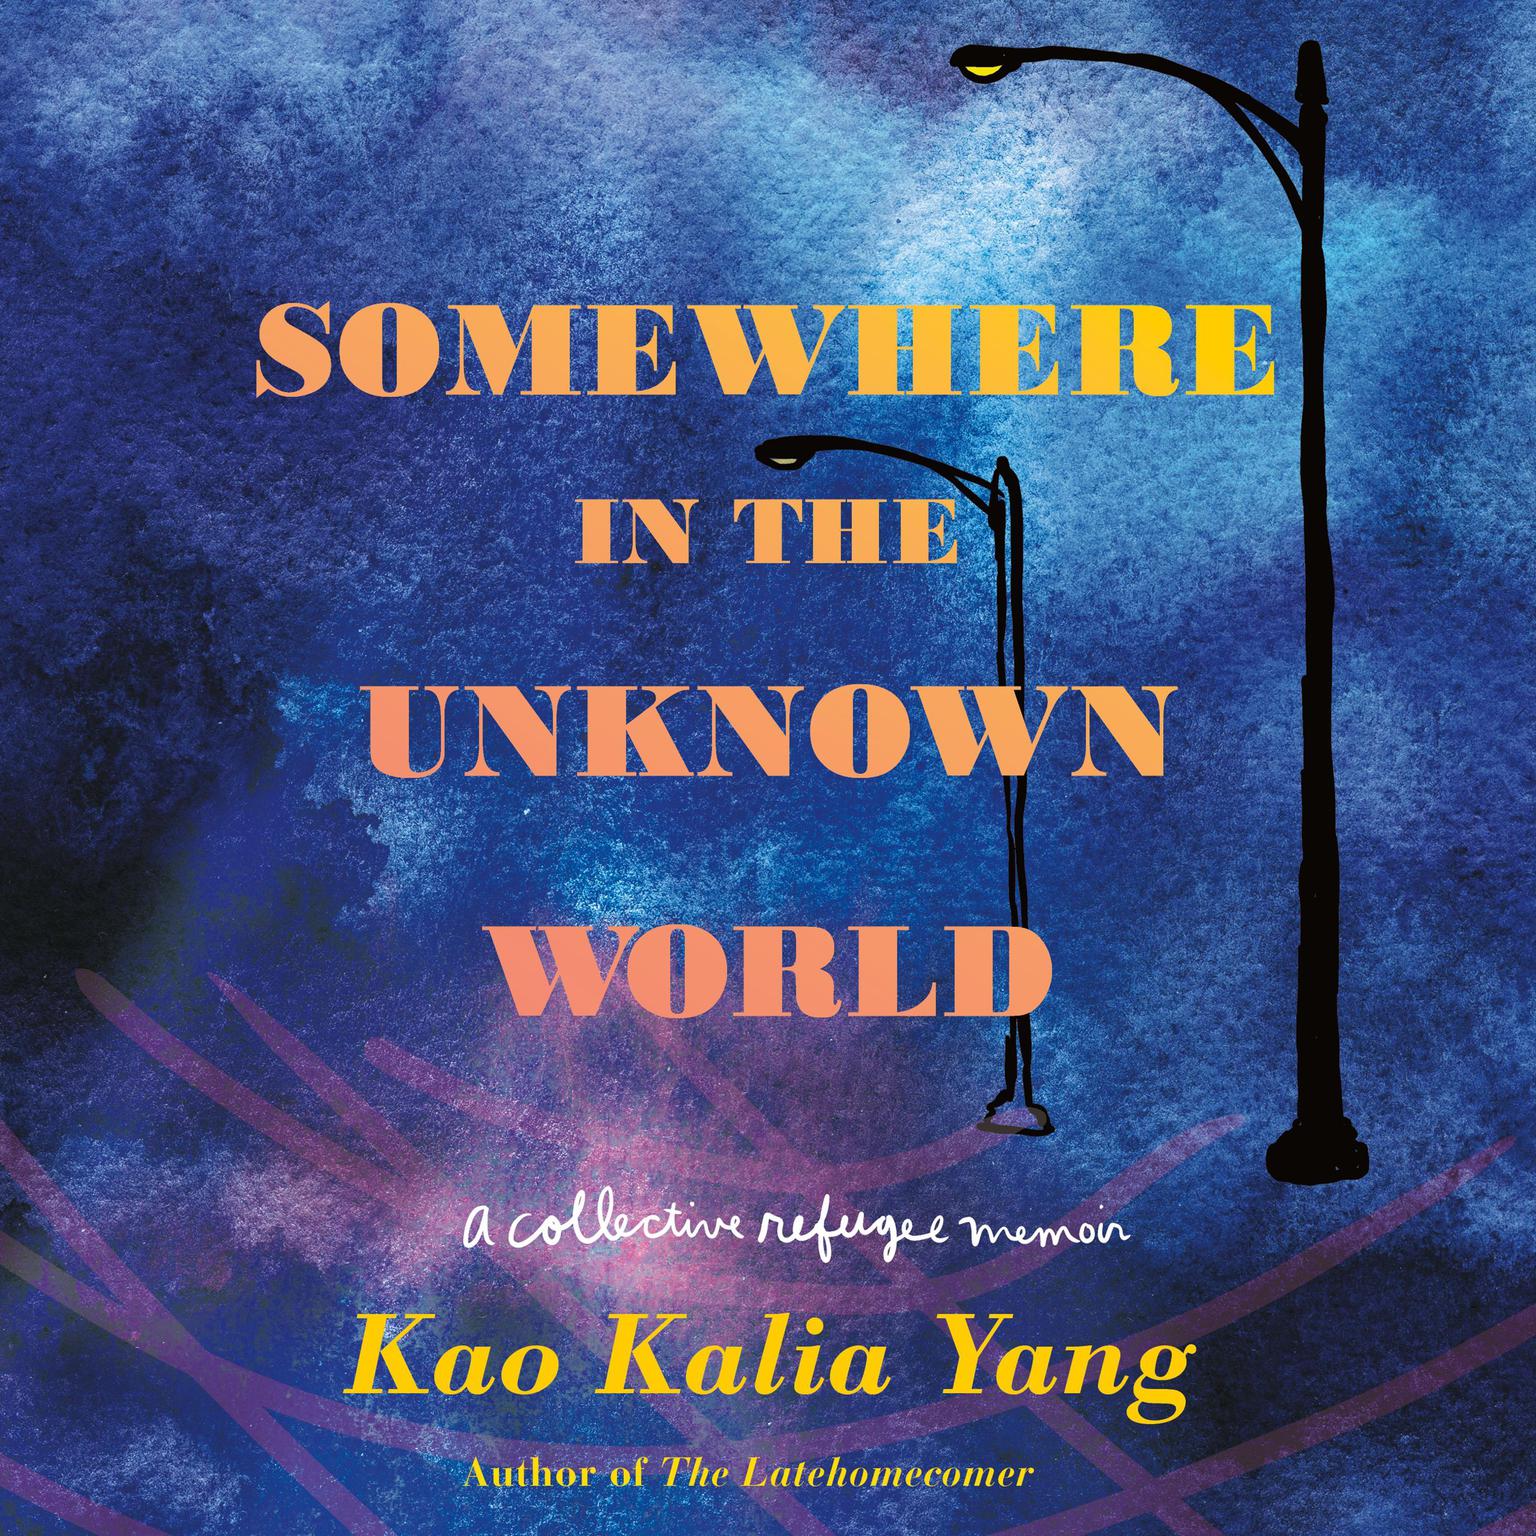 Somewhere in the Unknown World: A Collective Refugee Memoir Audiobook, by Kao Kalia Yang